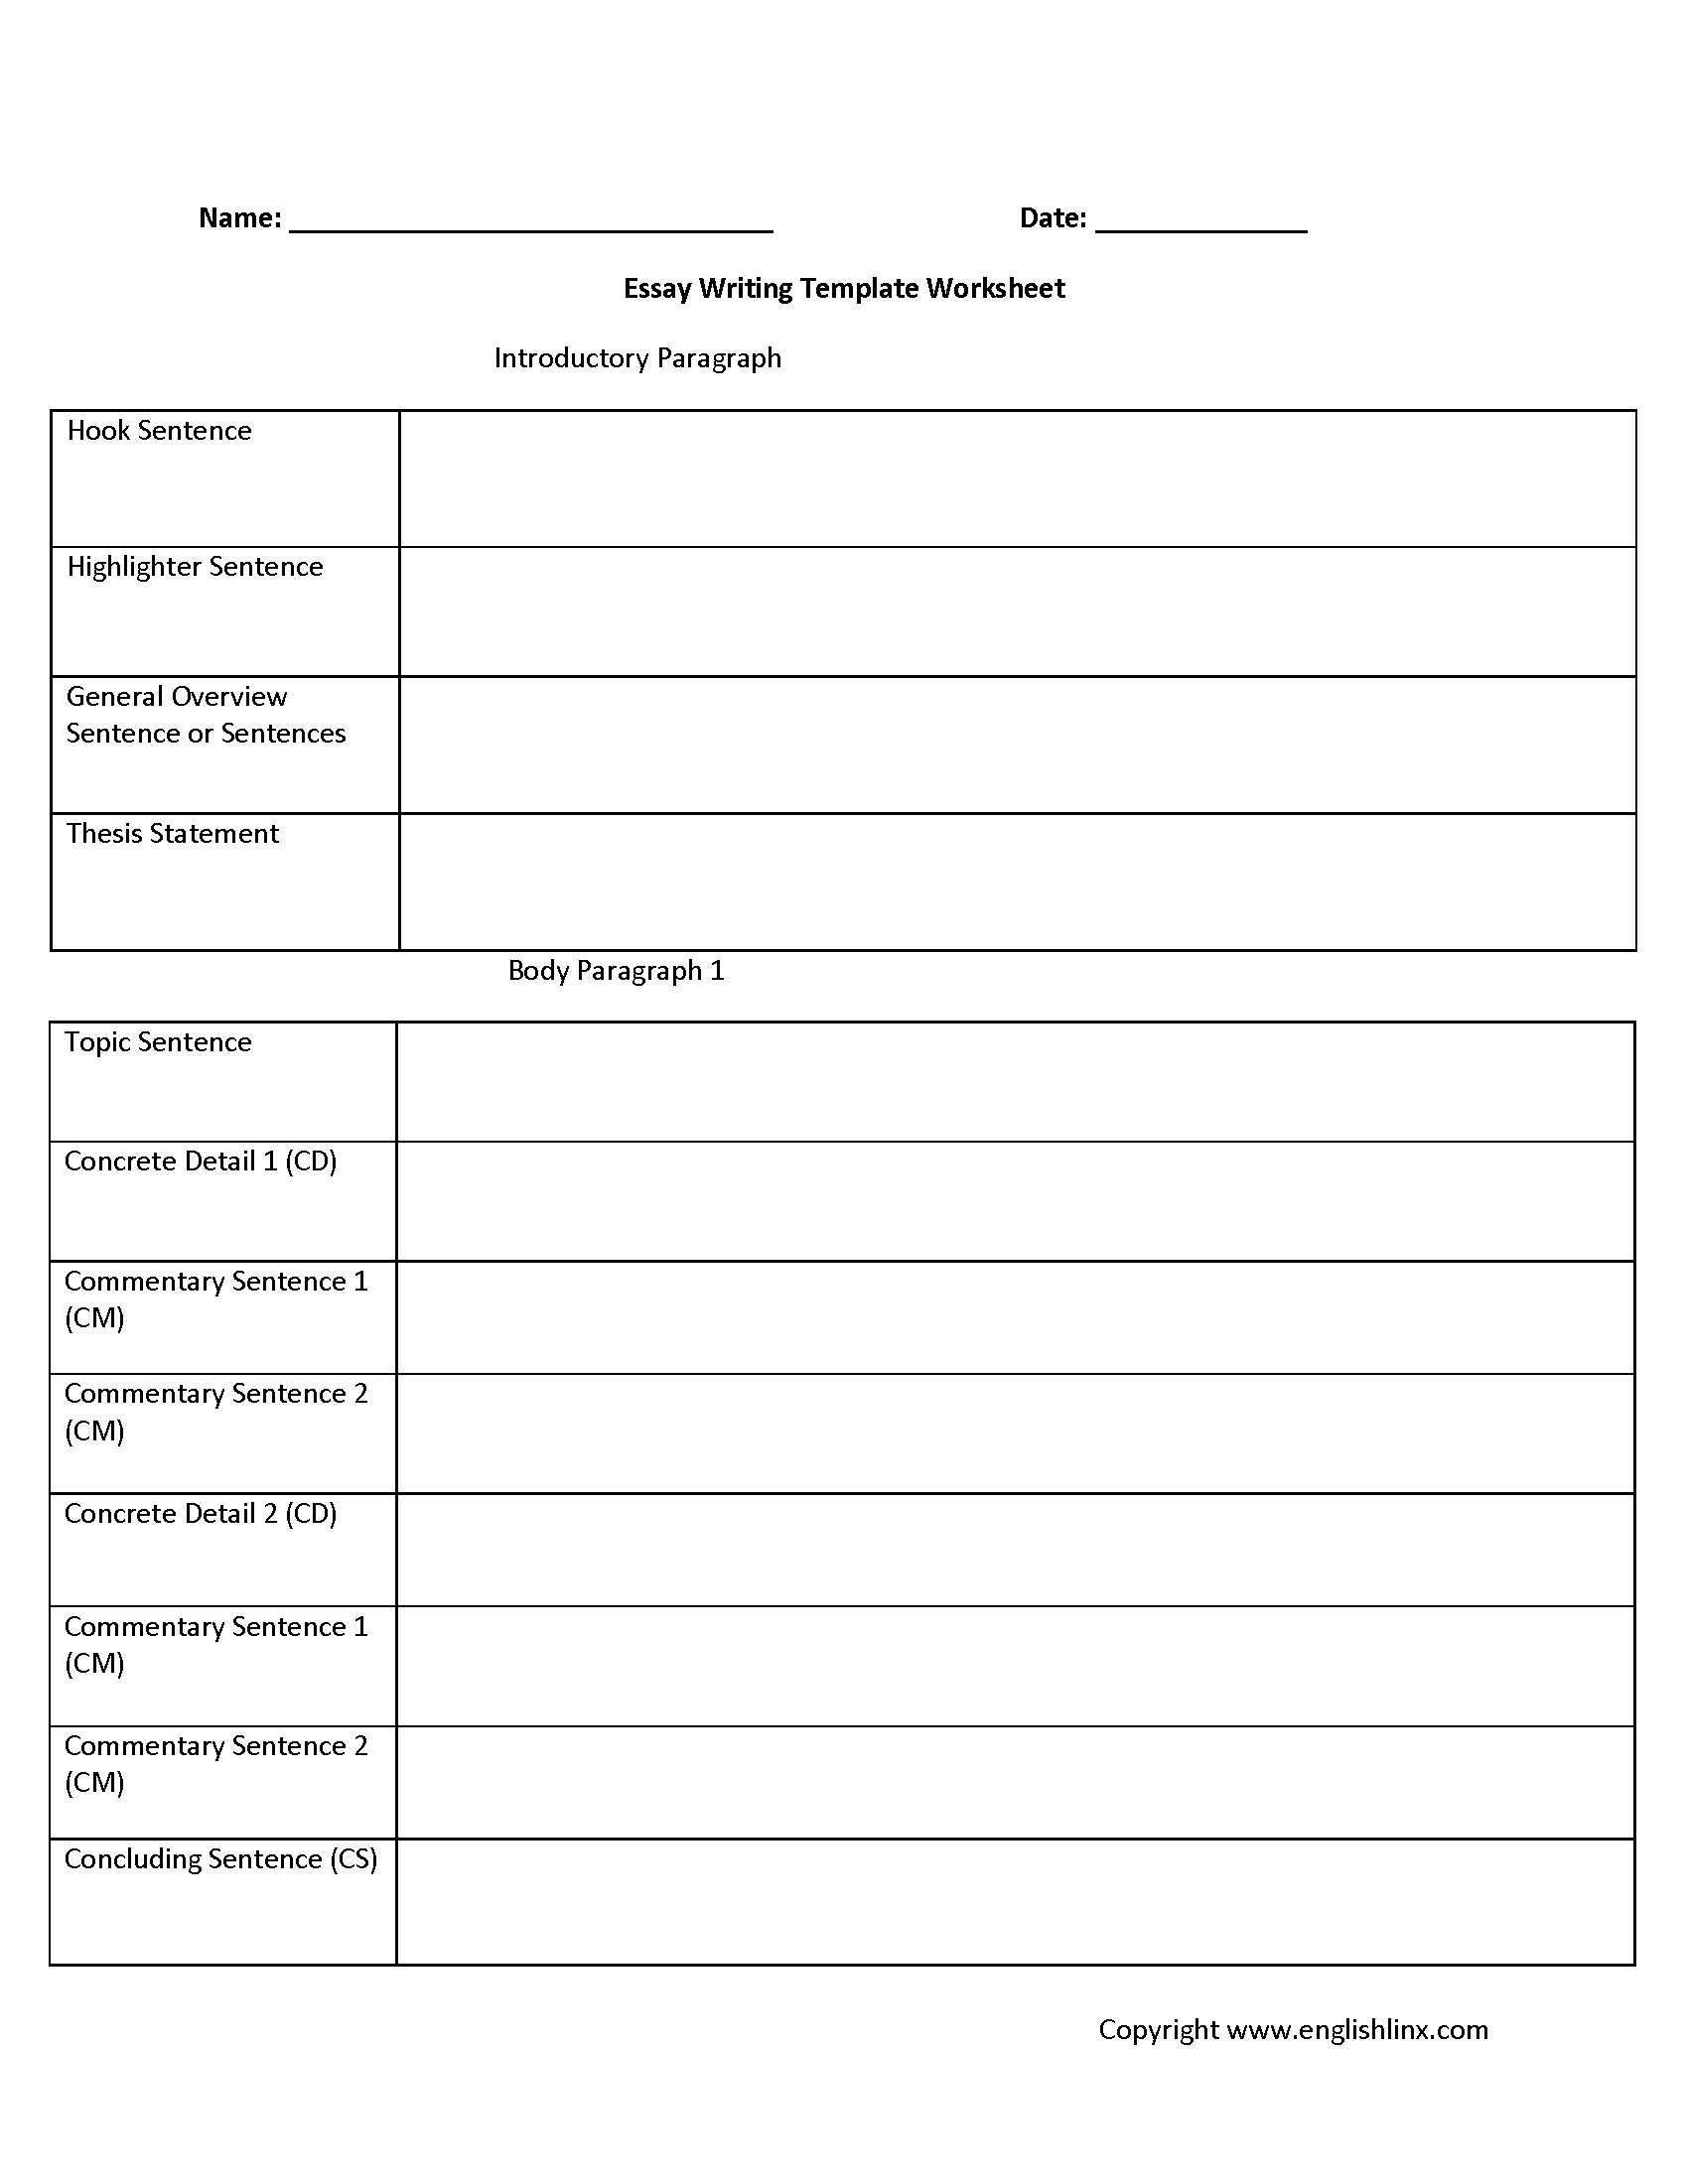 Paragraph Writing Template